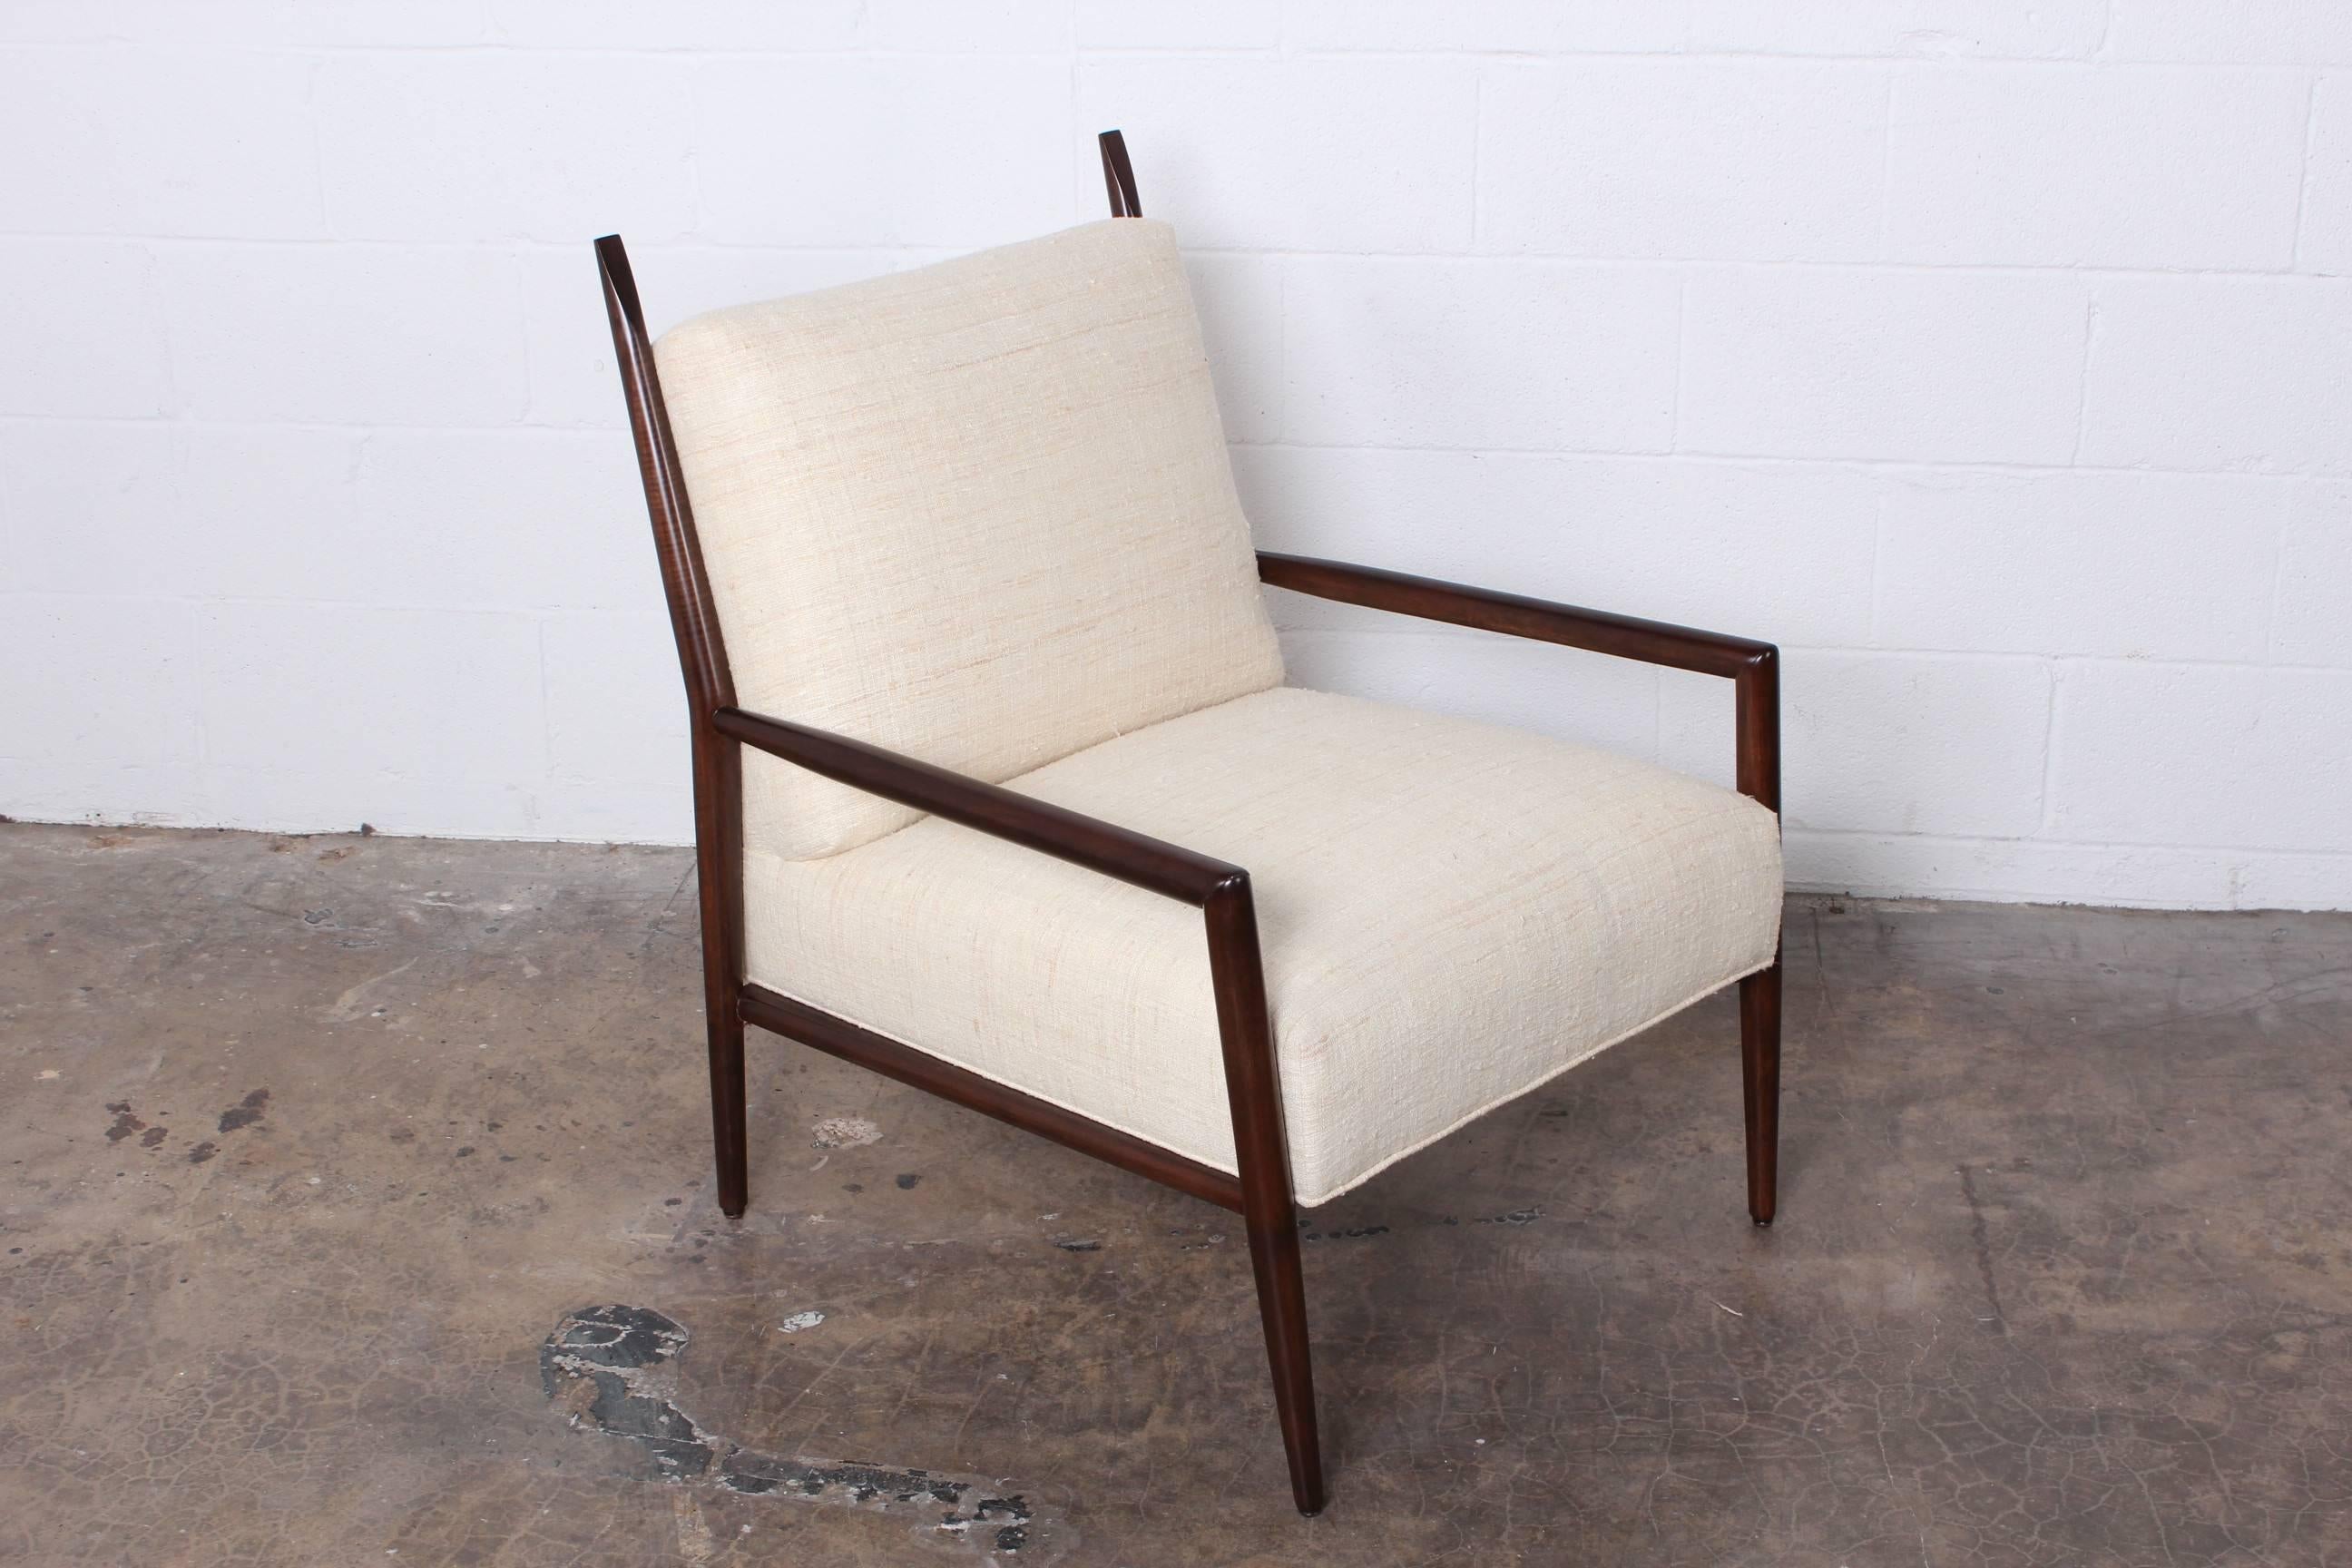 A lounge chair designed by Paul McCobb for Winchendon.